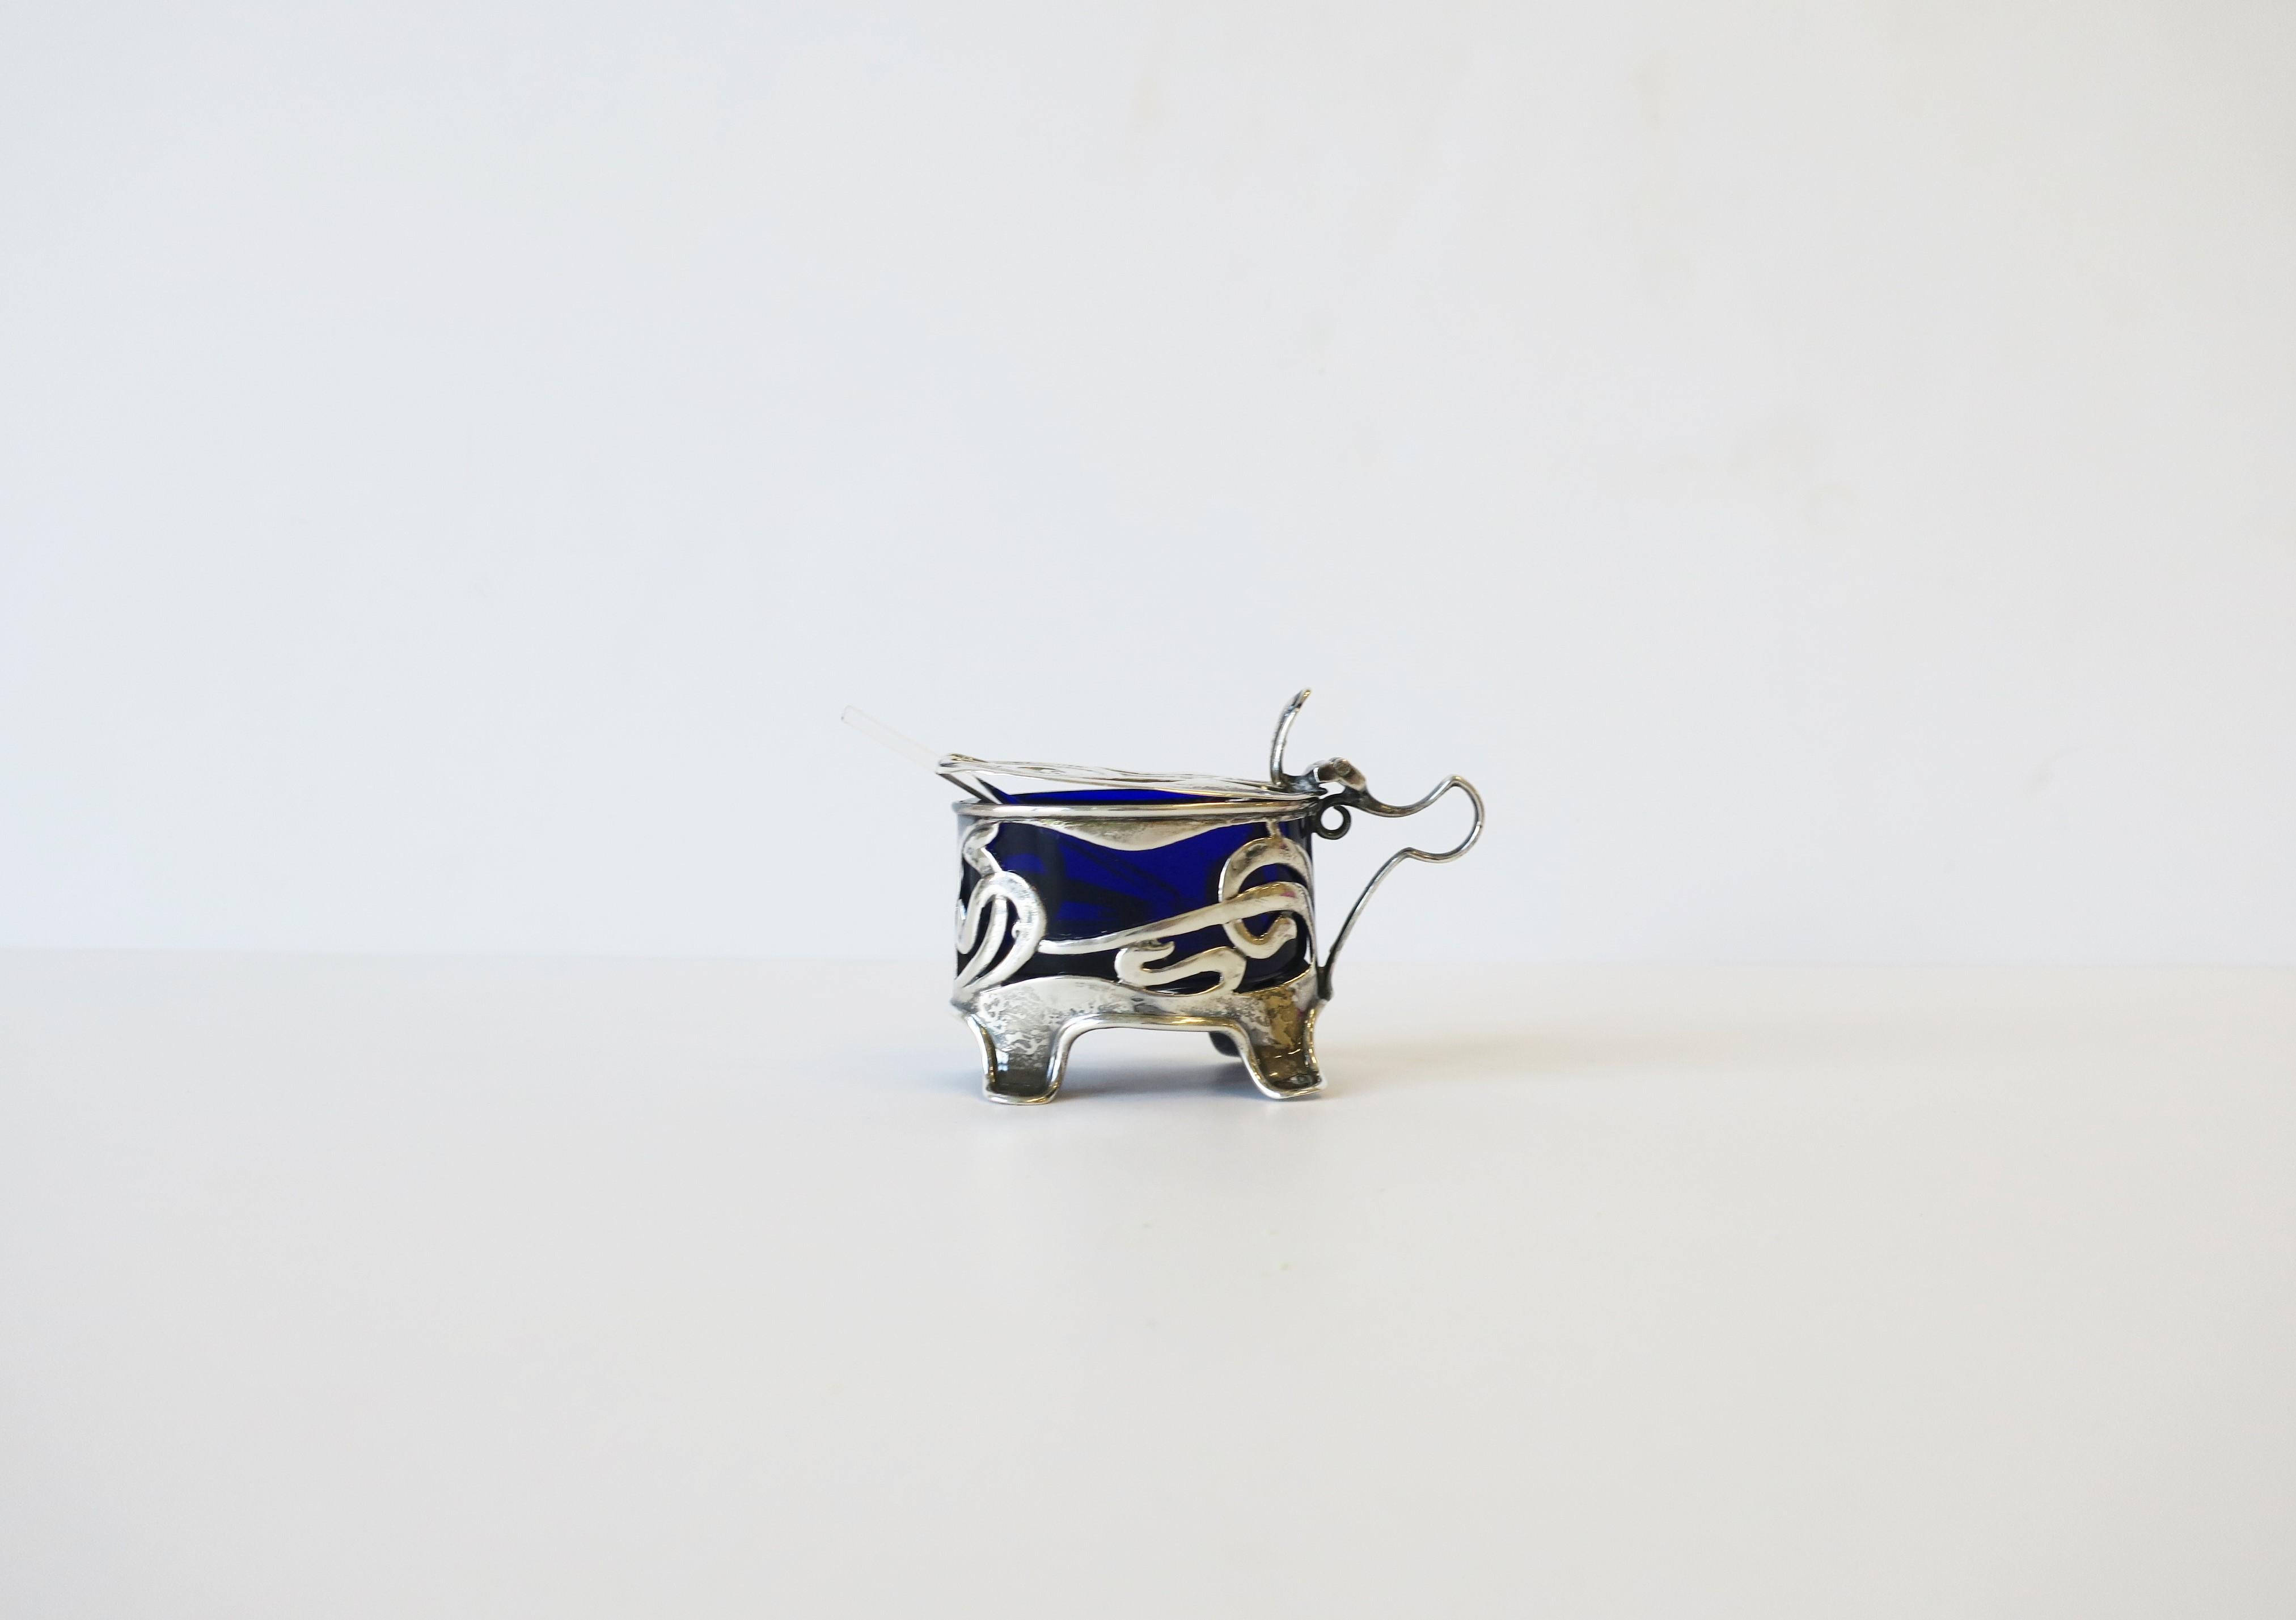 A beautiful English Art Nouveau sterling silver salt (or pepper) cellar, circa 20th century, England. Cellar or vessel has oval sapphire blue glass insert and comes with a small crystal spoon. With marker's and sterling silver mark's shown in image